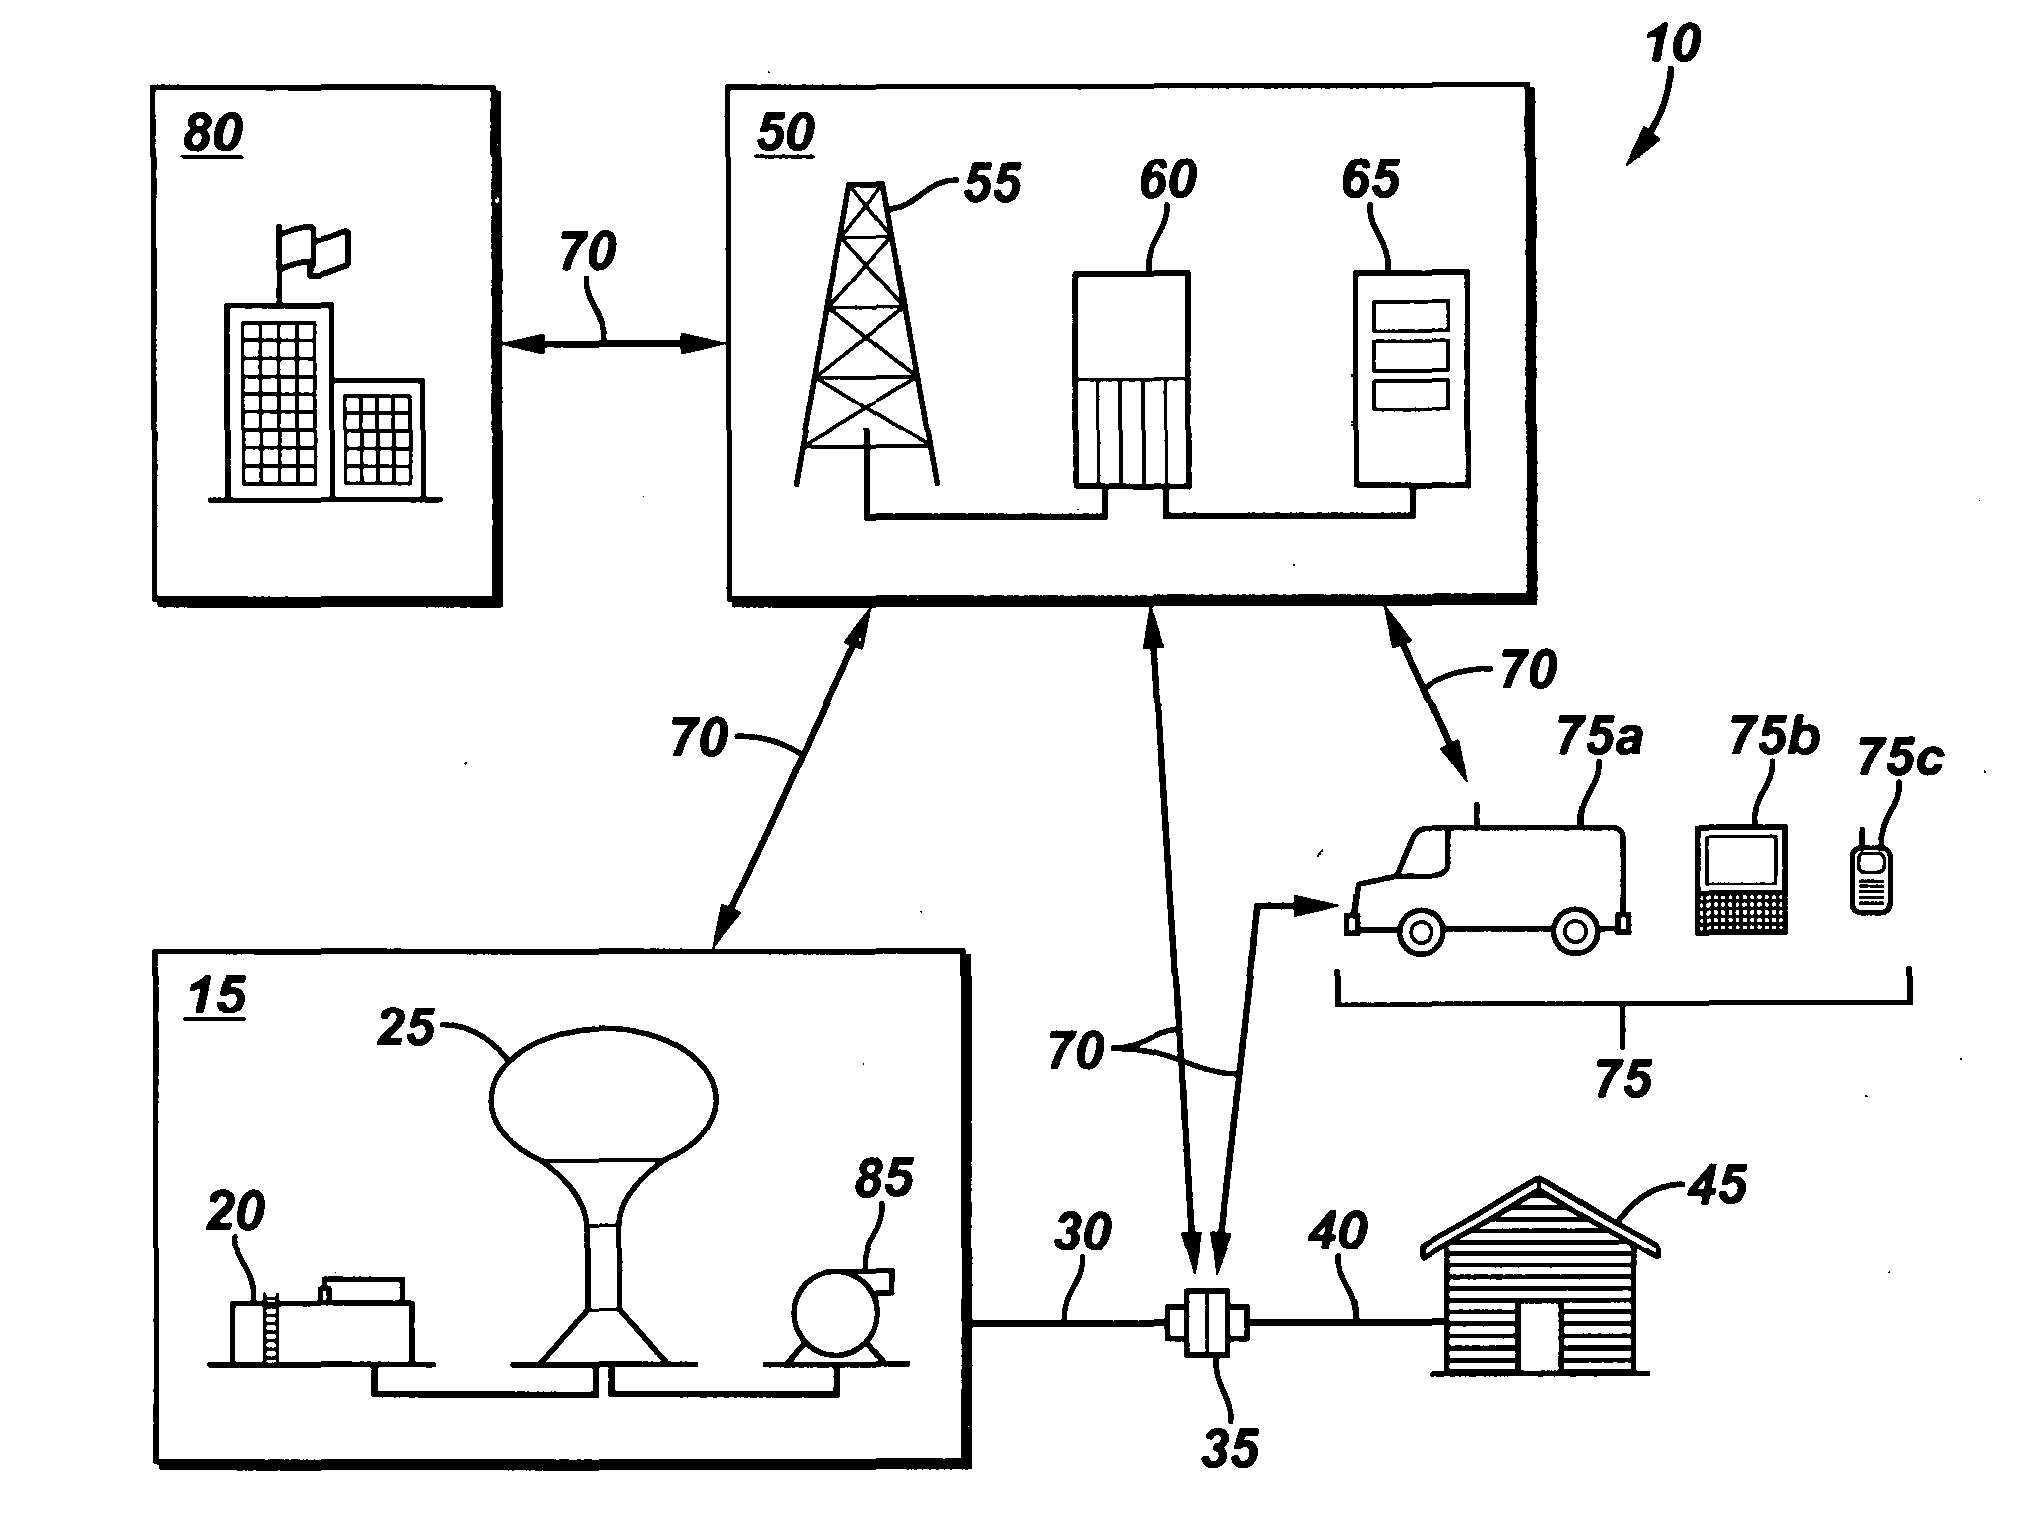 System and method for remotely monitoring and controlling a water meter